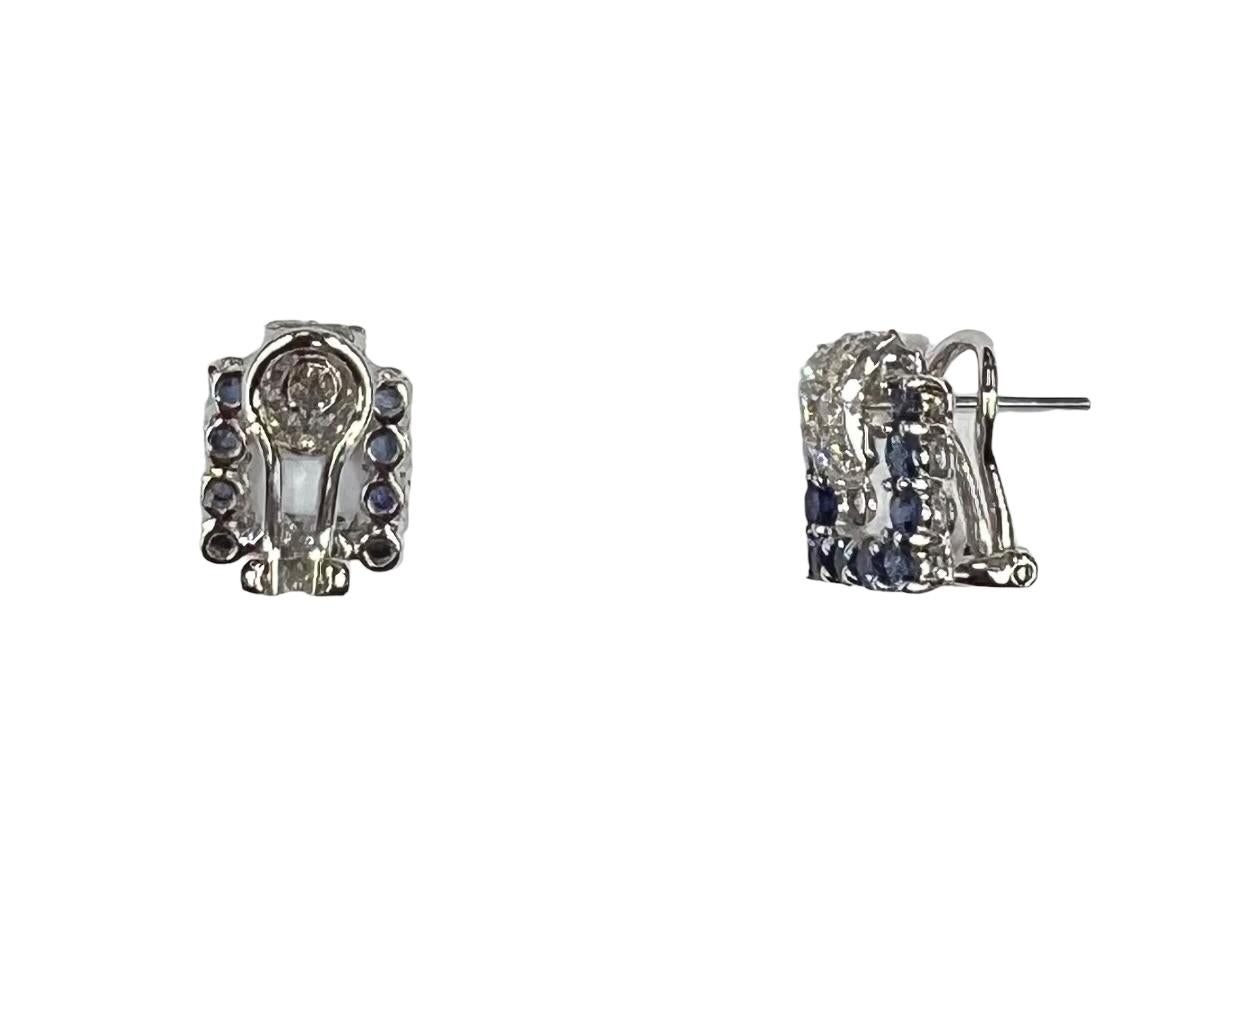 Sapphire diamond white gold pierced clip on earrings.

These lovely earrings are just right for everyday wearing or for dress up.  The sapphires have that beautiful lighter royal blue color 
along with the near-colorless white diamonds, all mounted